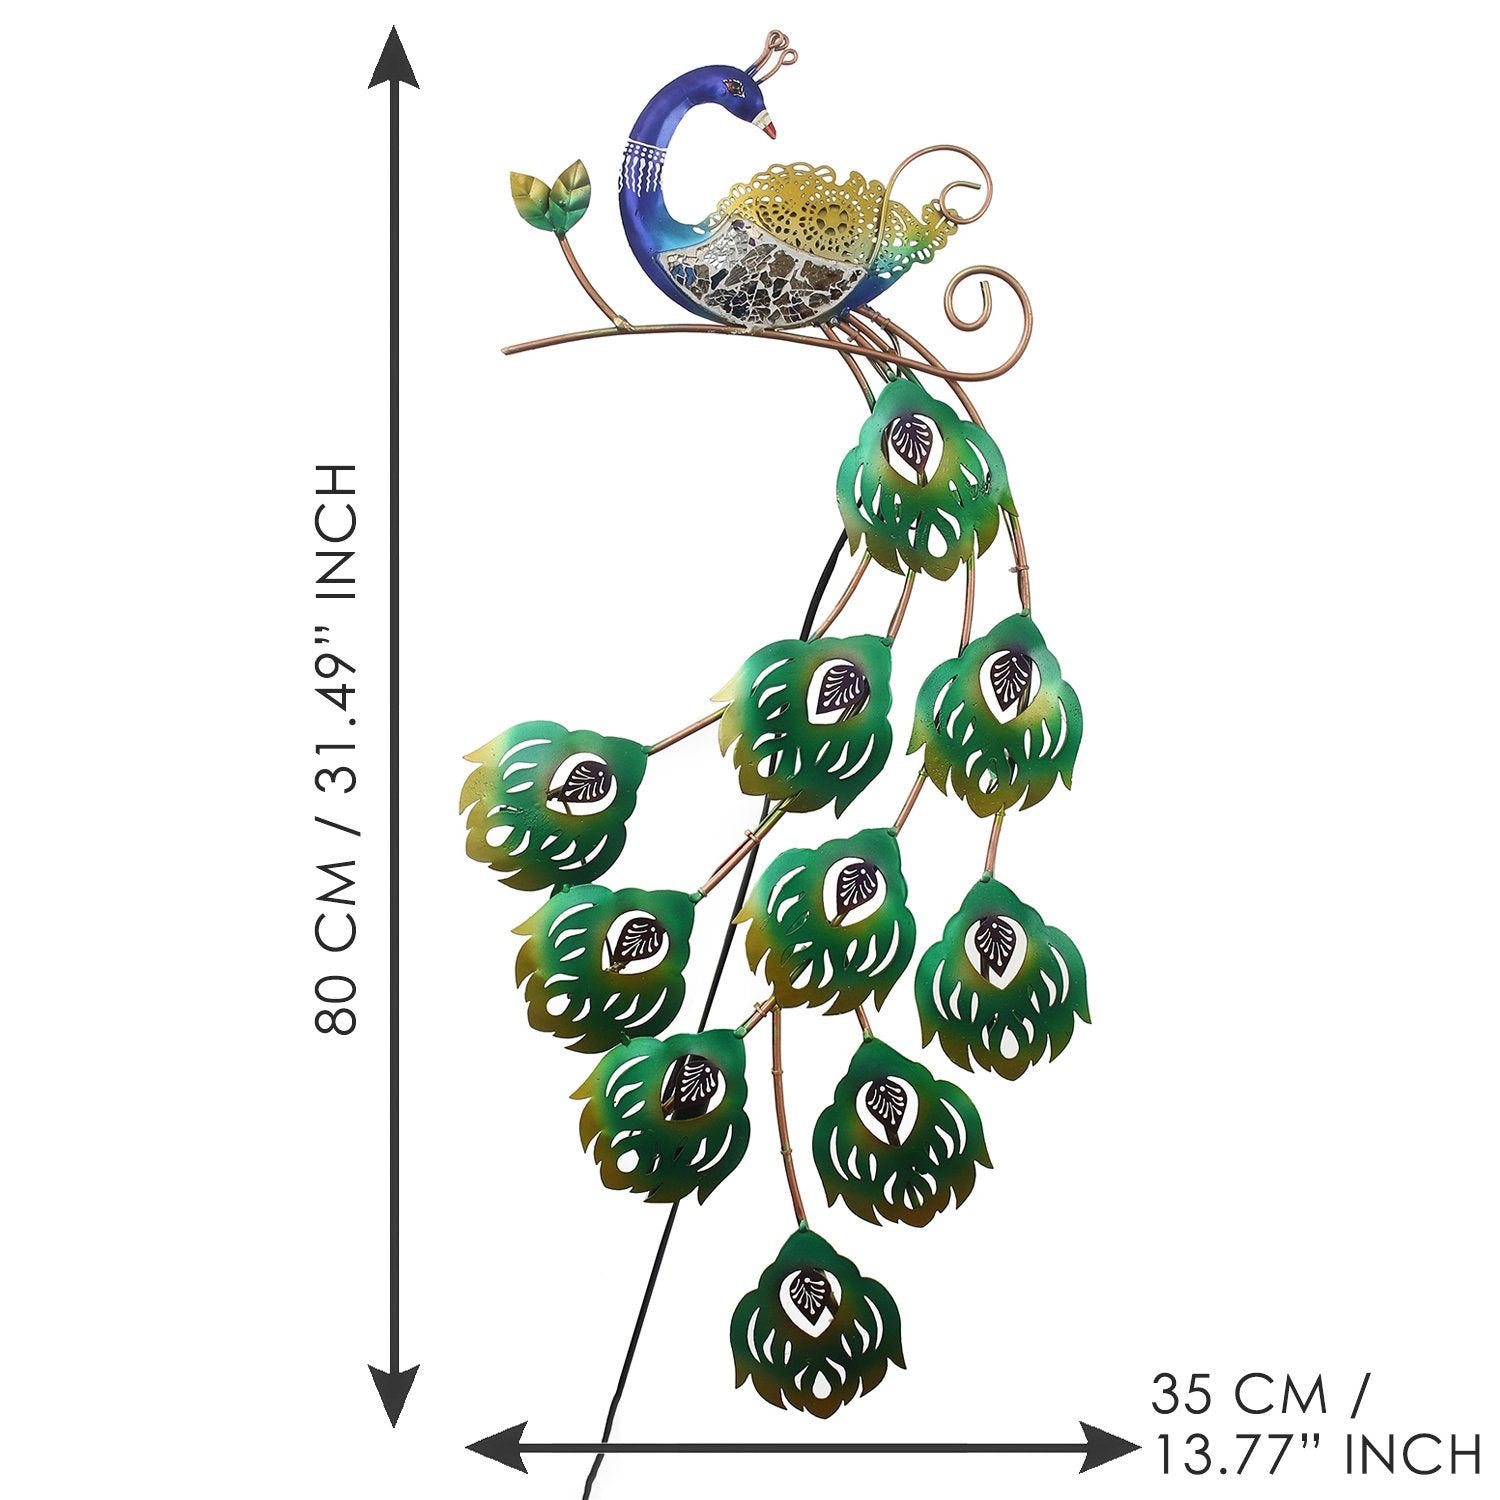 Colorful Dancing Peacock Handcrafted Iron Wall Hanging with background LED's (Blue, Green and Golden) 3